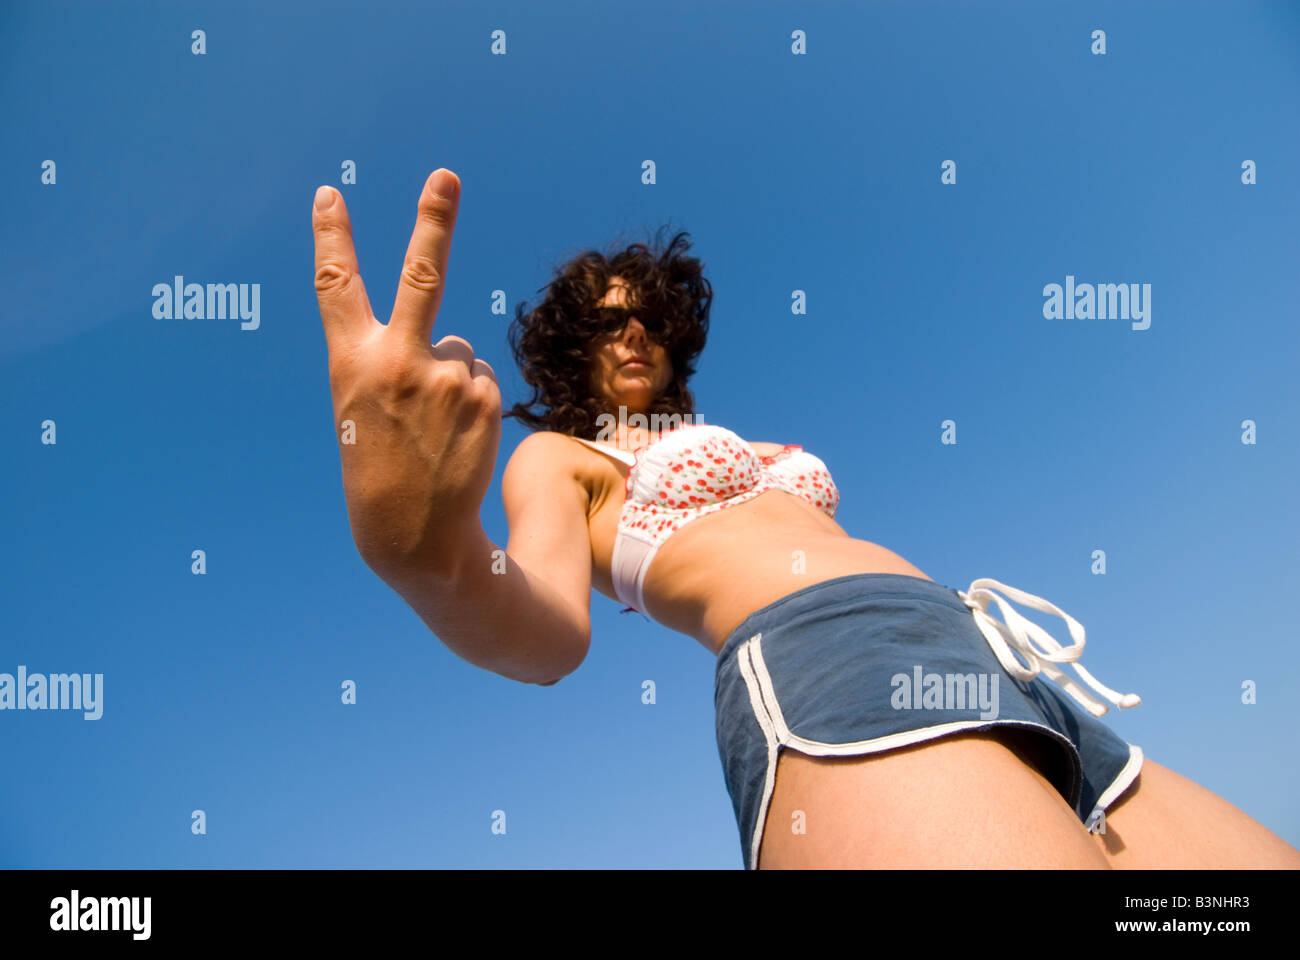 Model Released Female forming an abusive V sign dressed in beachwear Low angle focus on hand Stock Photo